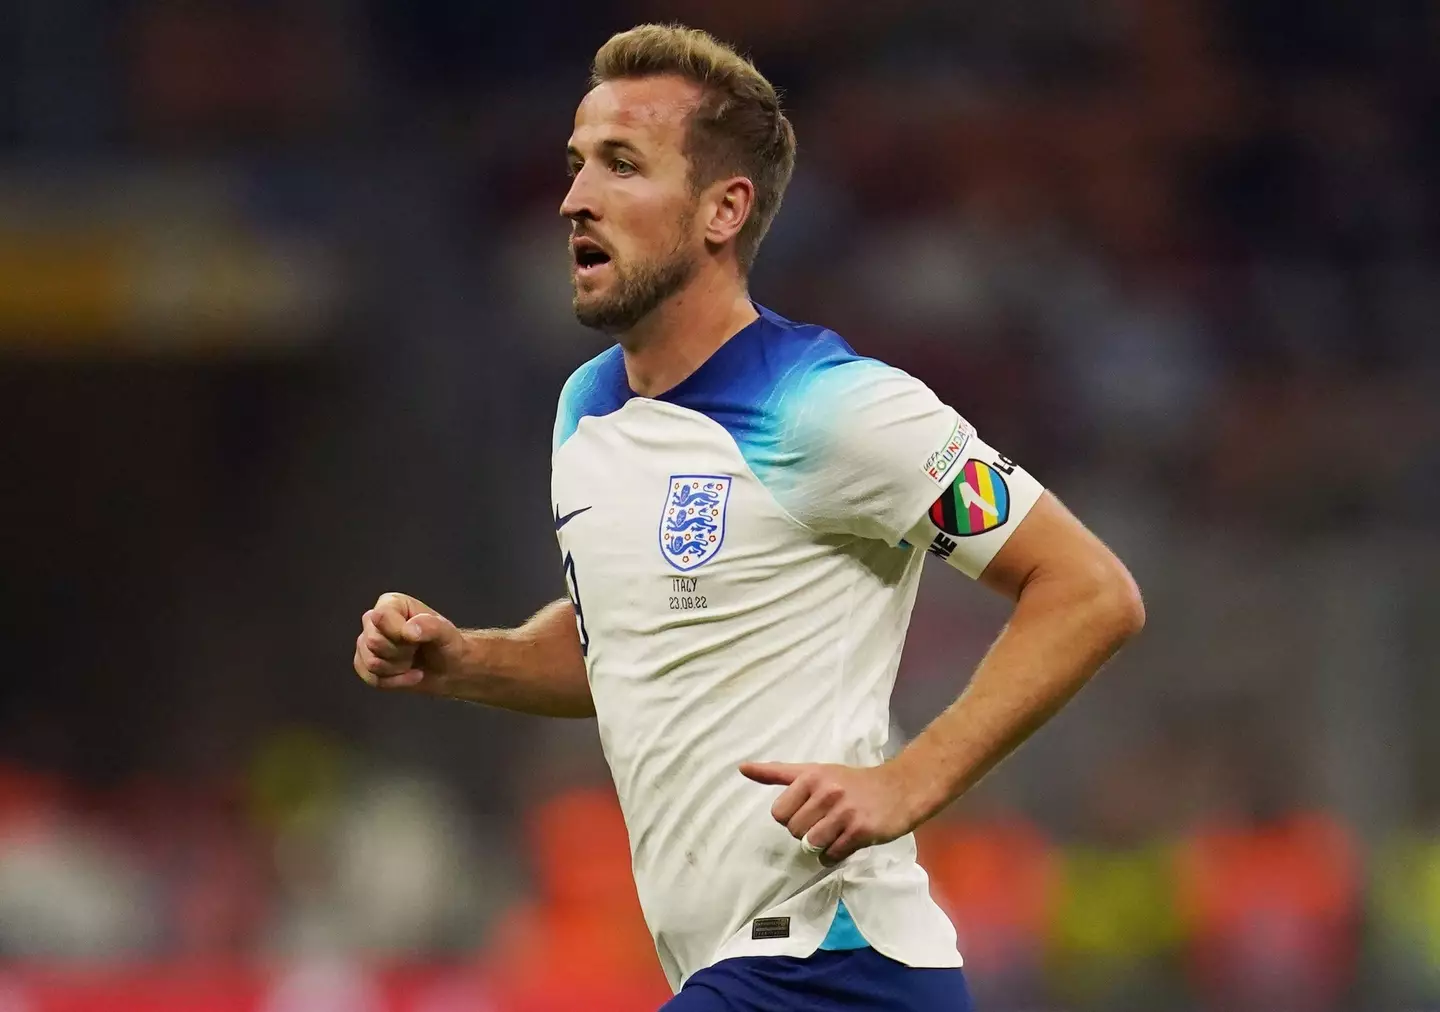 Harry Kane wouldn't have been allowed onto the pitch if he'd worn the OneLove armband.